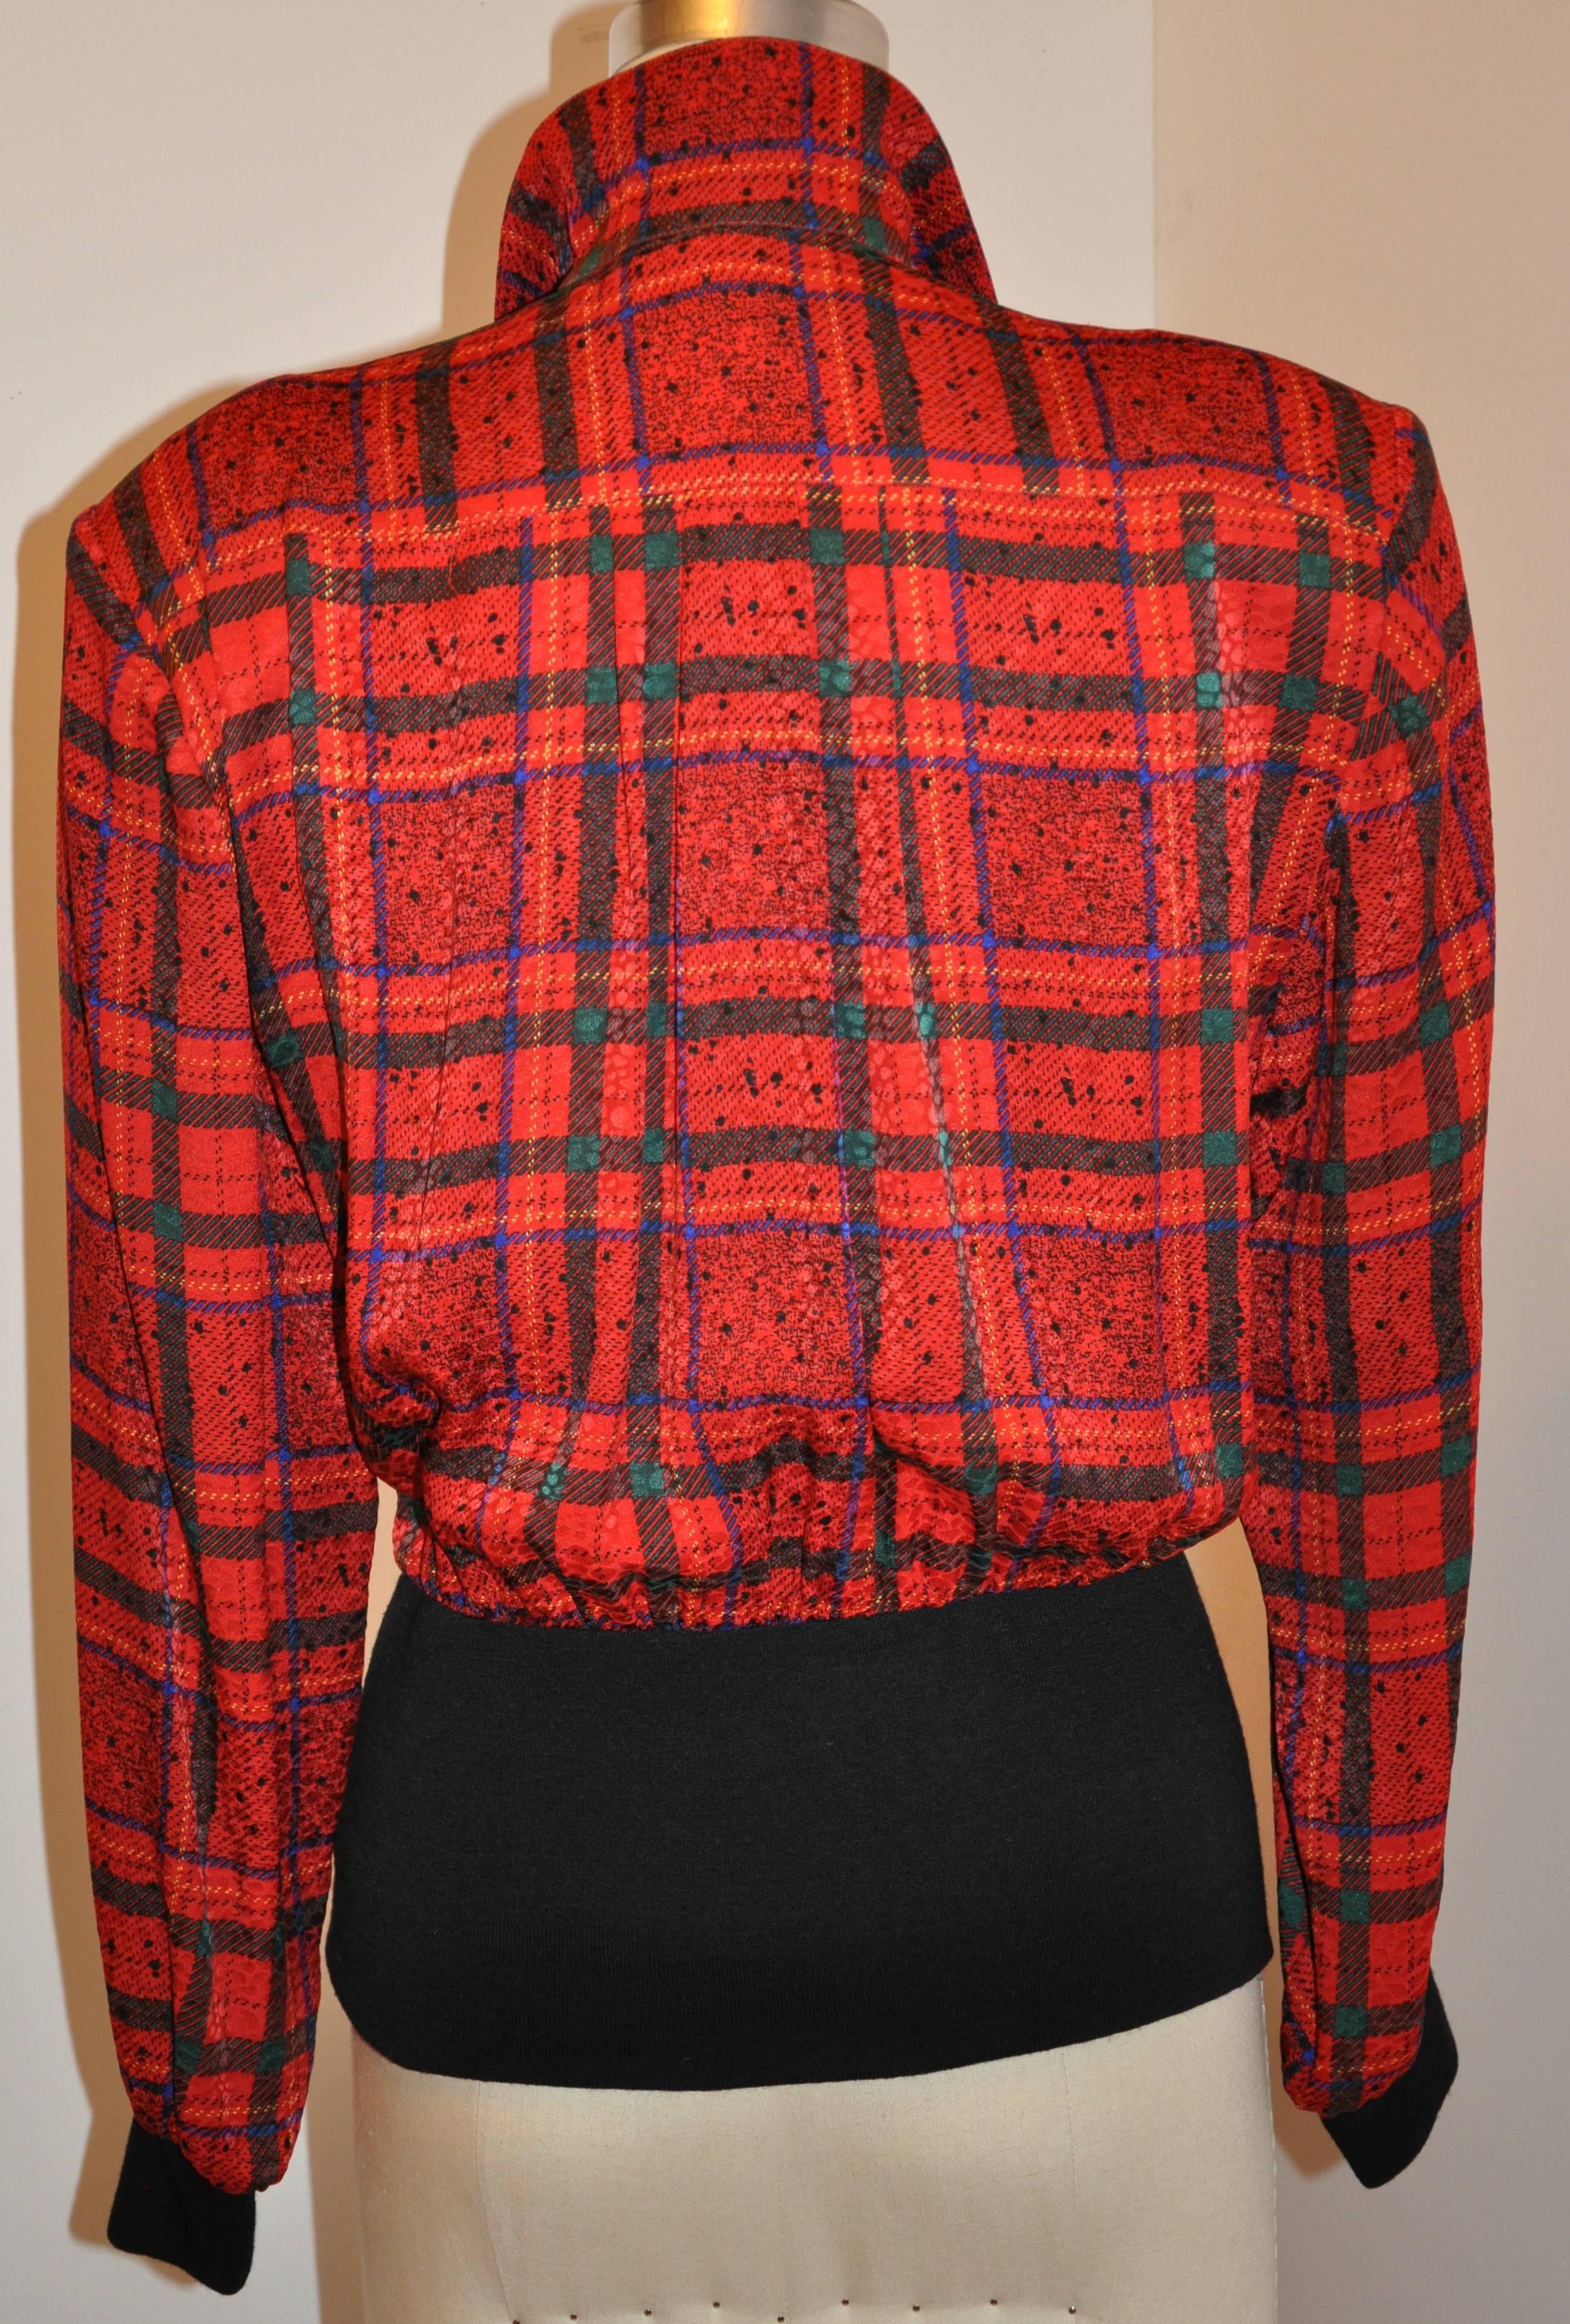        Cardiere et Cie wonderful combination of multi-color silk plaid is accented with a double-layer of black wool jersey on the band. The shoulder measures 17